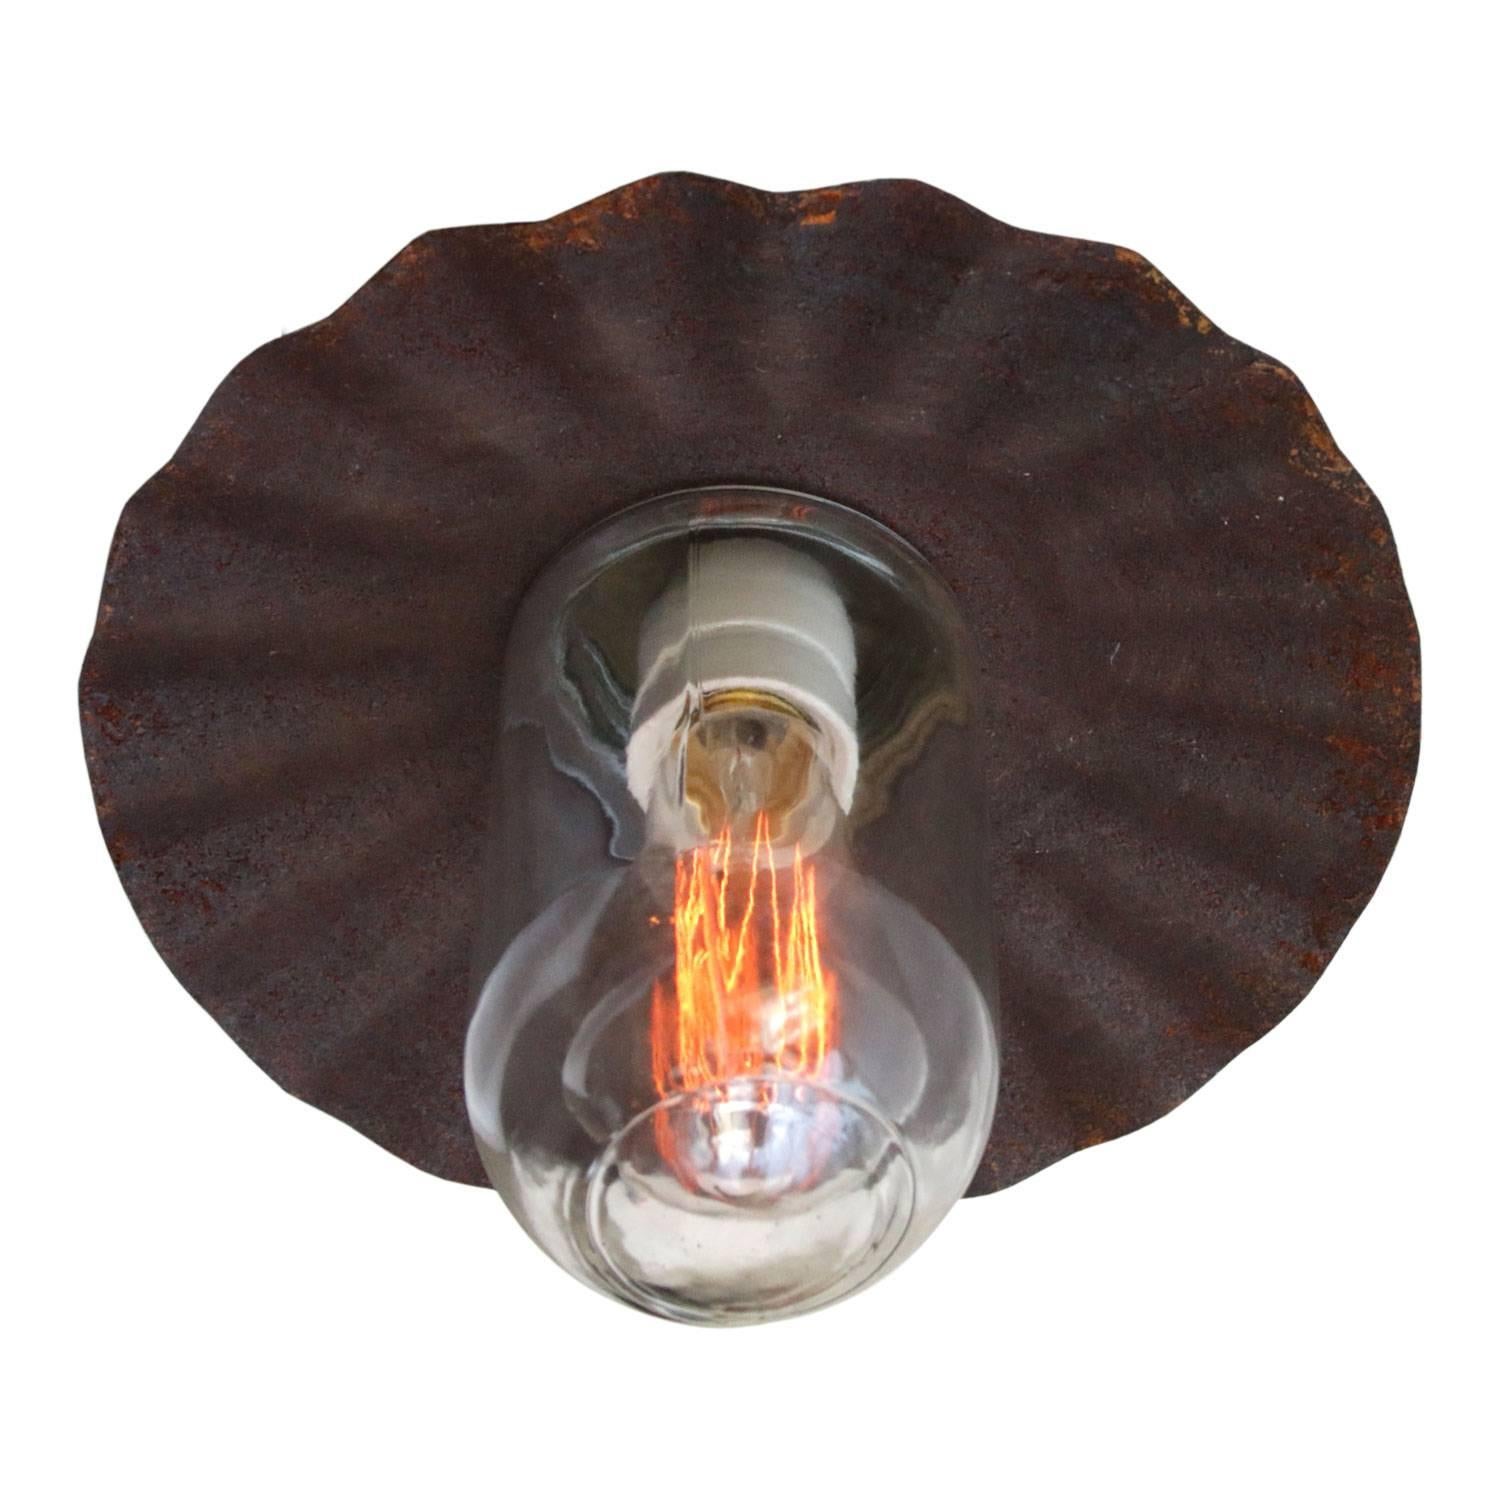 Industrial pendant lights with rusty shade and clear glass.

Weight 0.5 kg / 1.1 lb

All lamps have been made suitable by international standards for incandescent light bulbs, energy-efficient and LED bulbs. E26/E27 bulb holders and new wiring